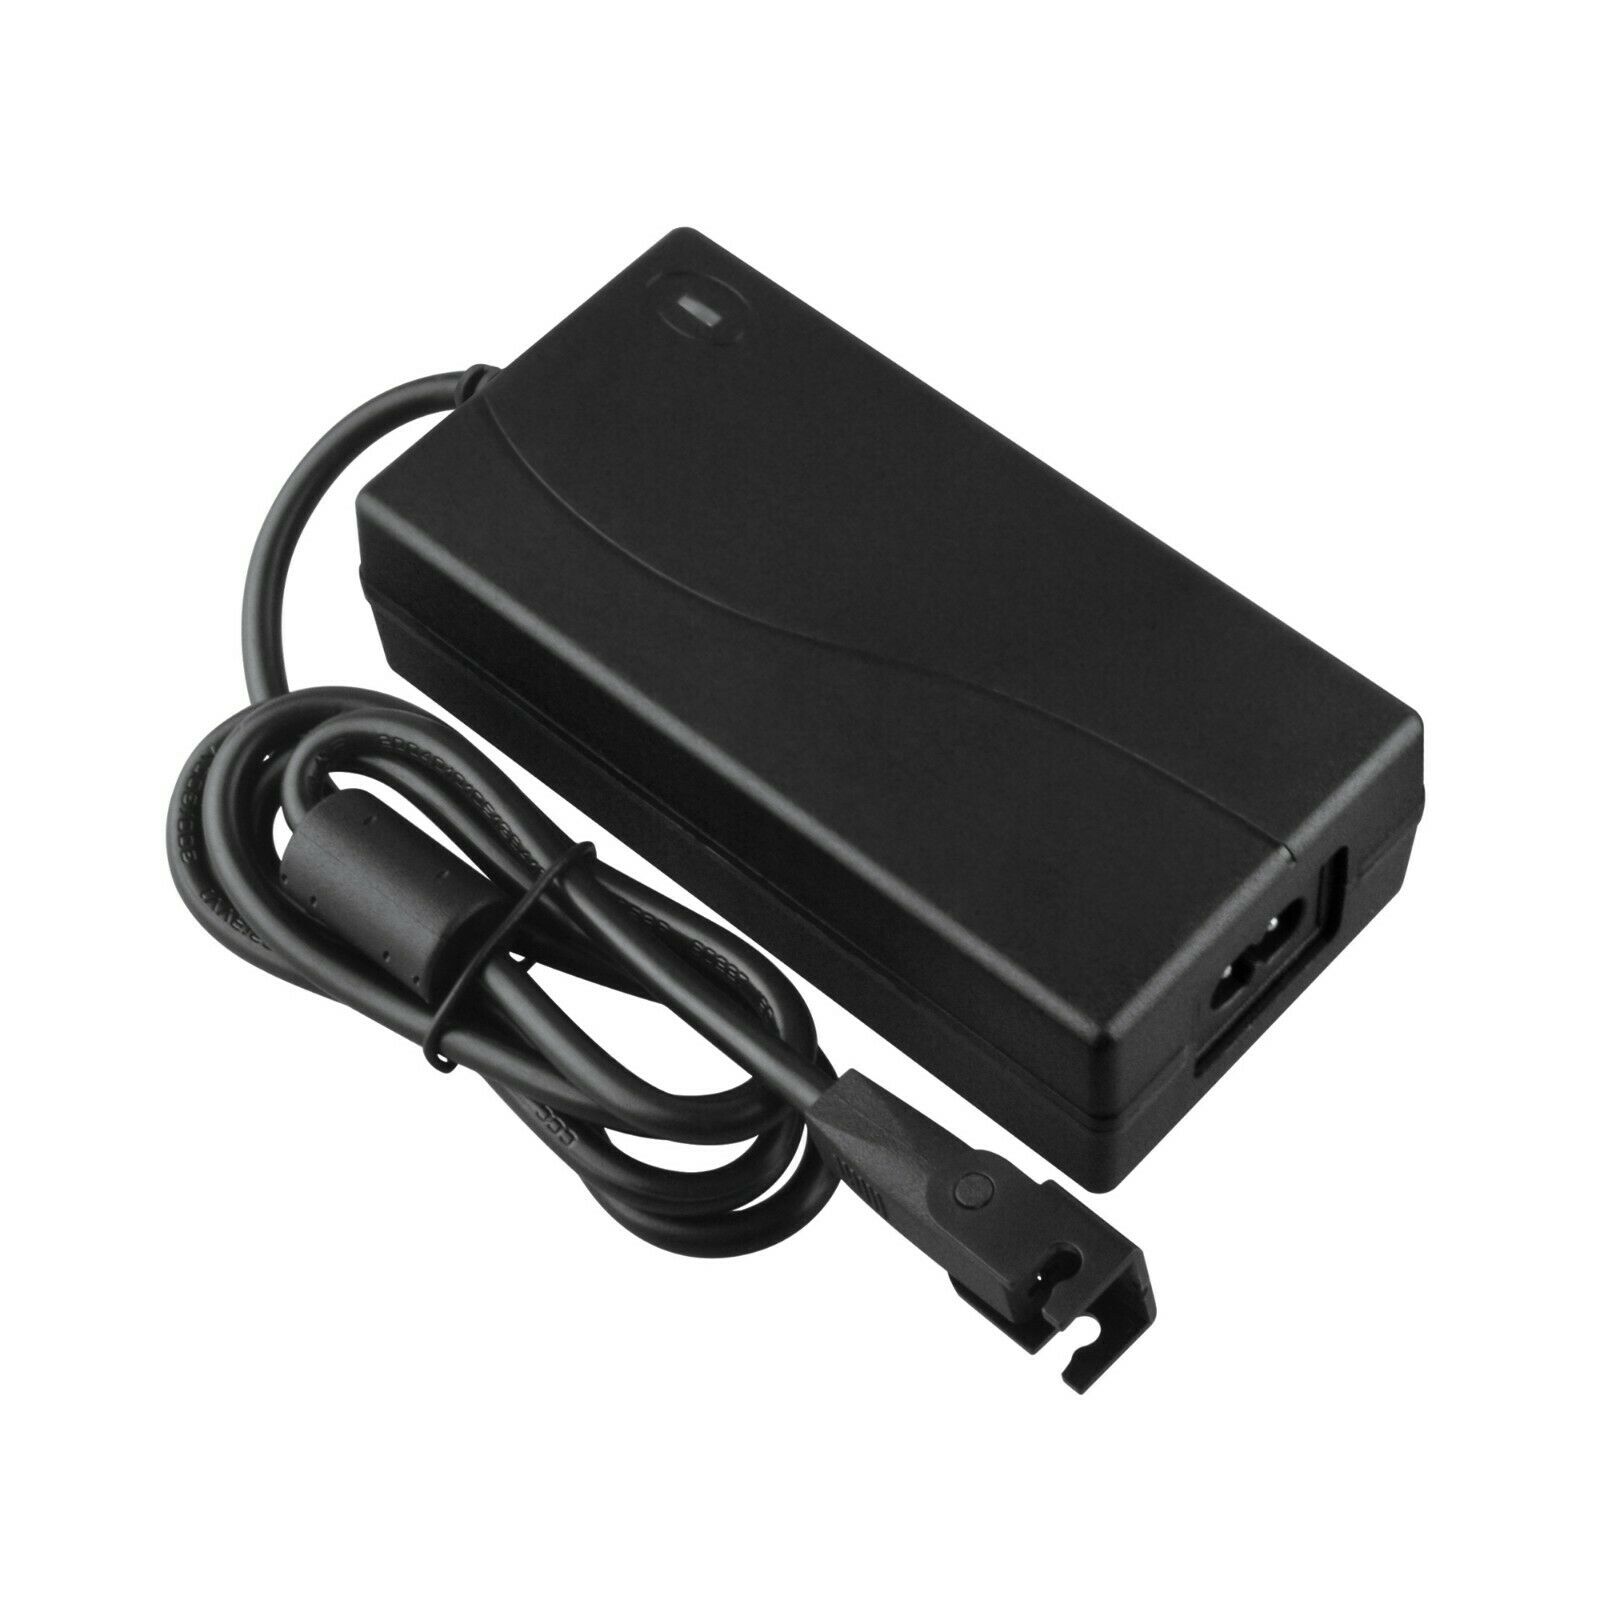 2-Prong AC/DC Adapter For Changzhou Kaidi Co Ltd P/N: KDDY001 KDDY008 KDDY001B Construction: 100% Brand New! Generic Re - Click Image to Close